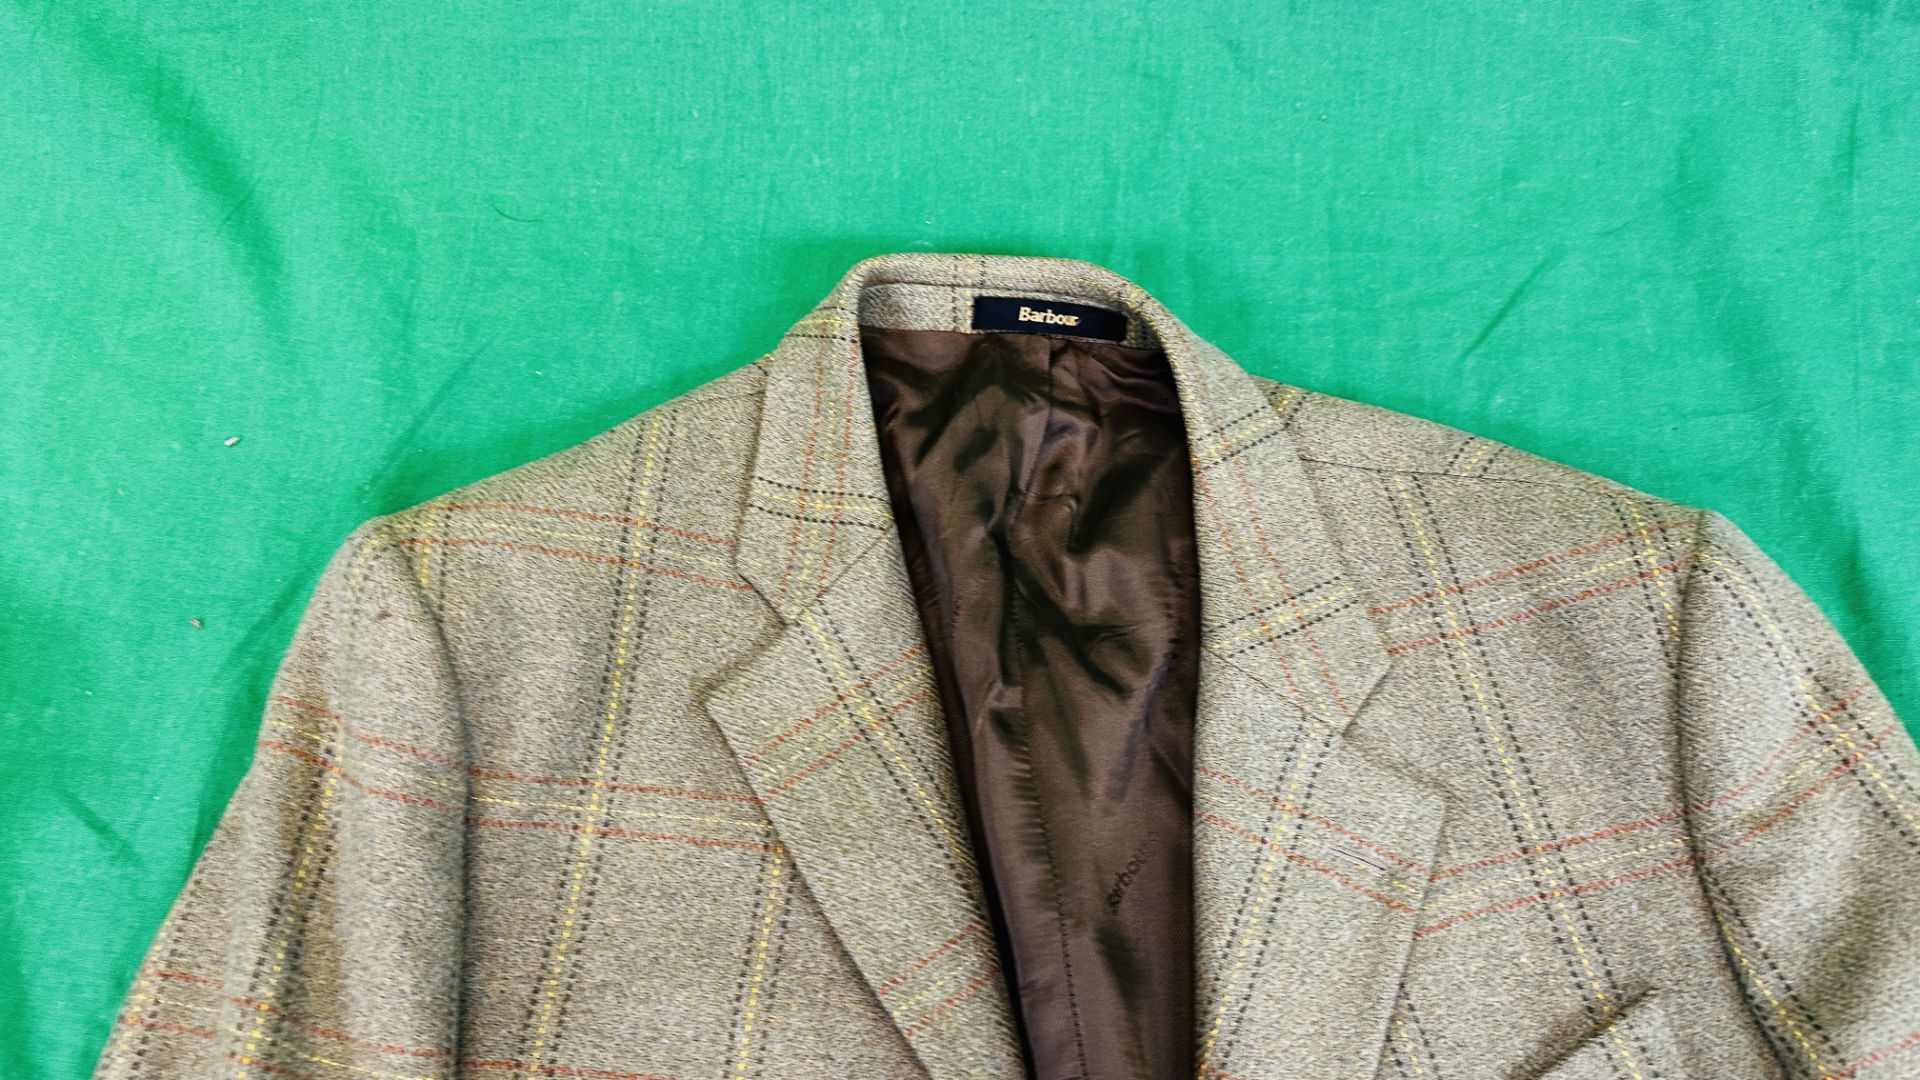 FIVE GENTS JACKETS TO INCLUDE BARBOUR TWEED JACKET, P.G. - Image 17 of 17